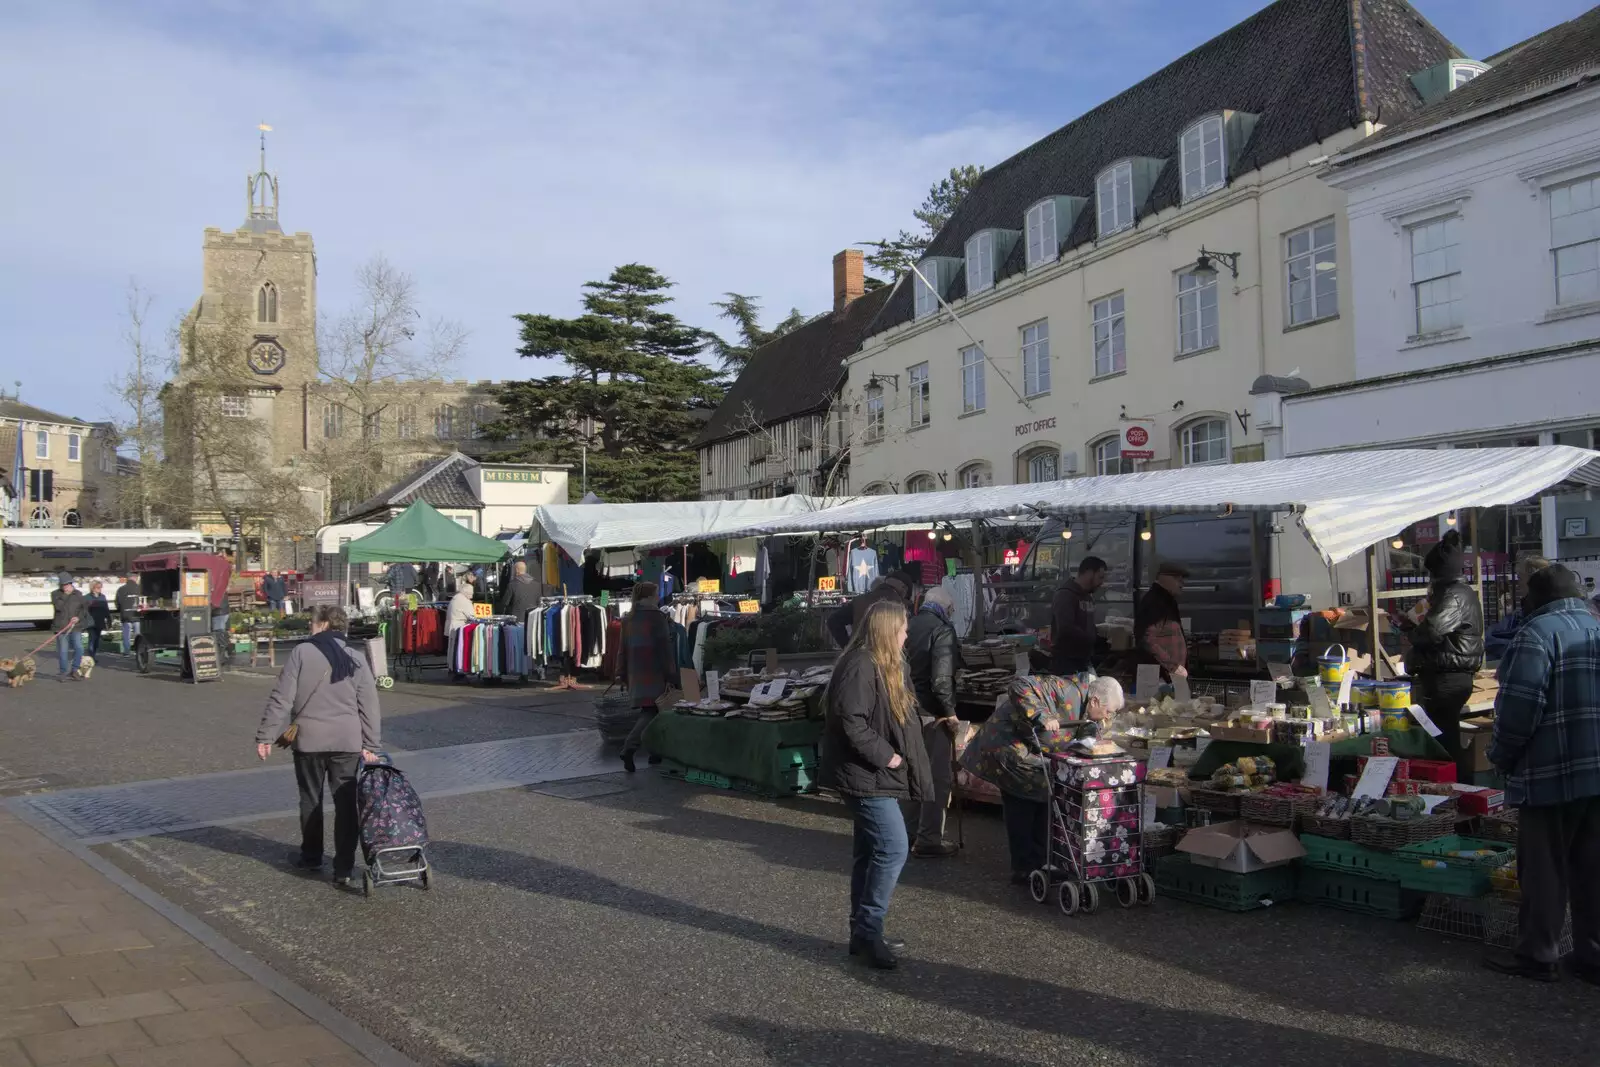 It's the traditional Friday market in Diss, from A February Miscellany, Diss and Woodbridge, Suffolk - 3rd February 2024